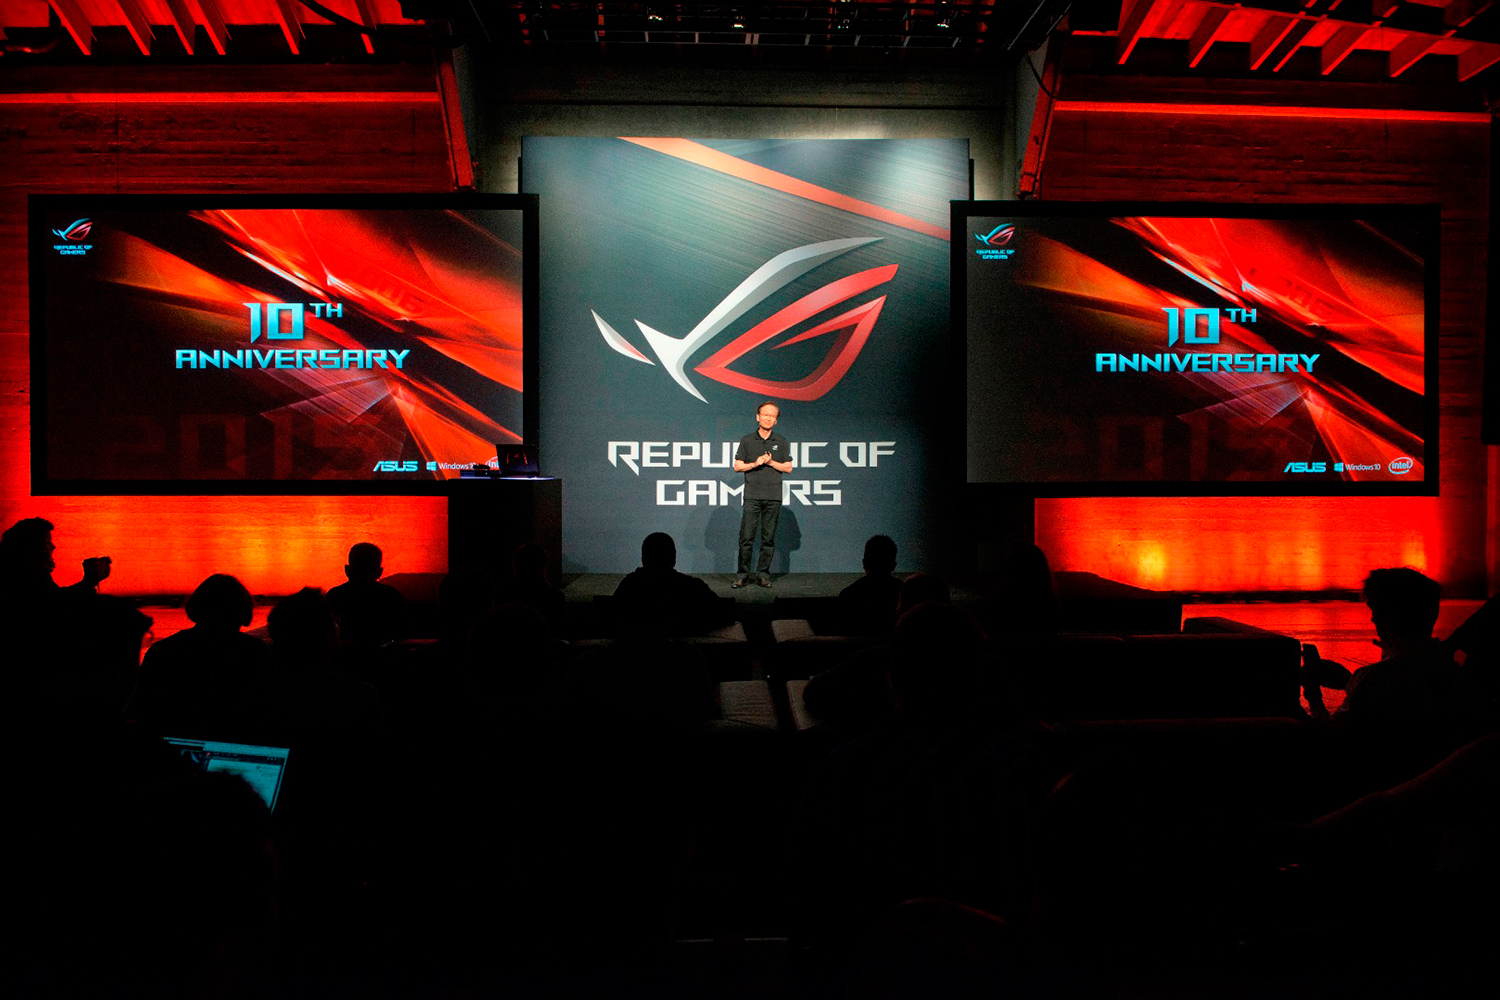 asus republic of gamers unleashed chairman jonney shih celebrates the near 10th anniversary